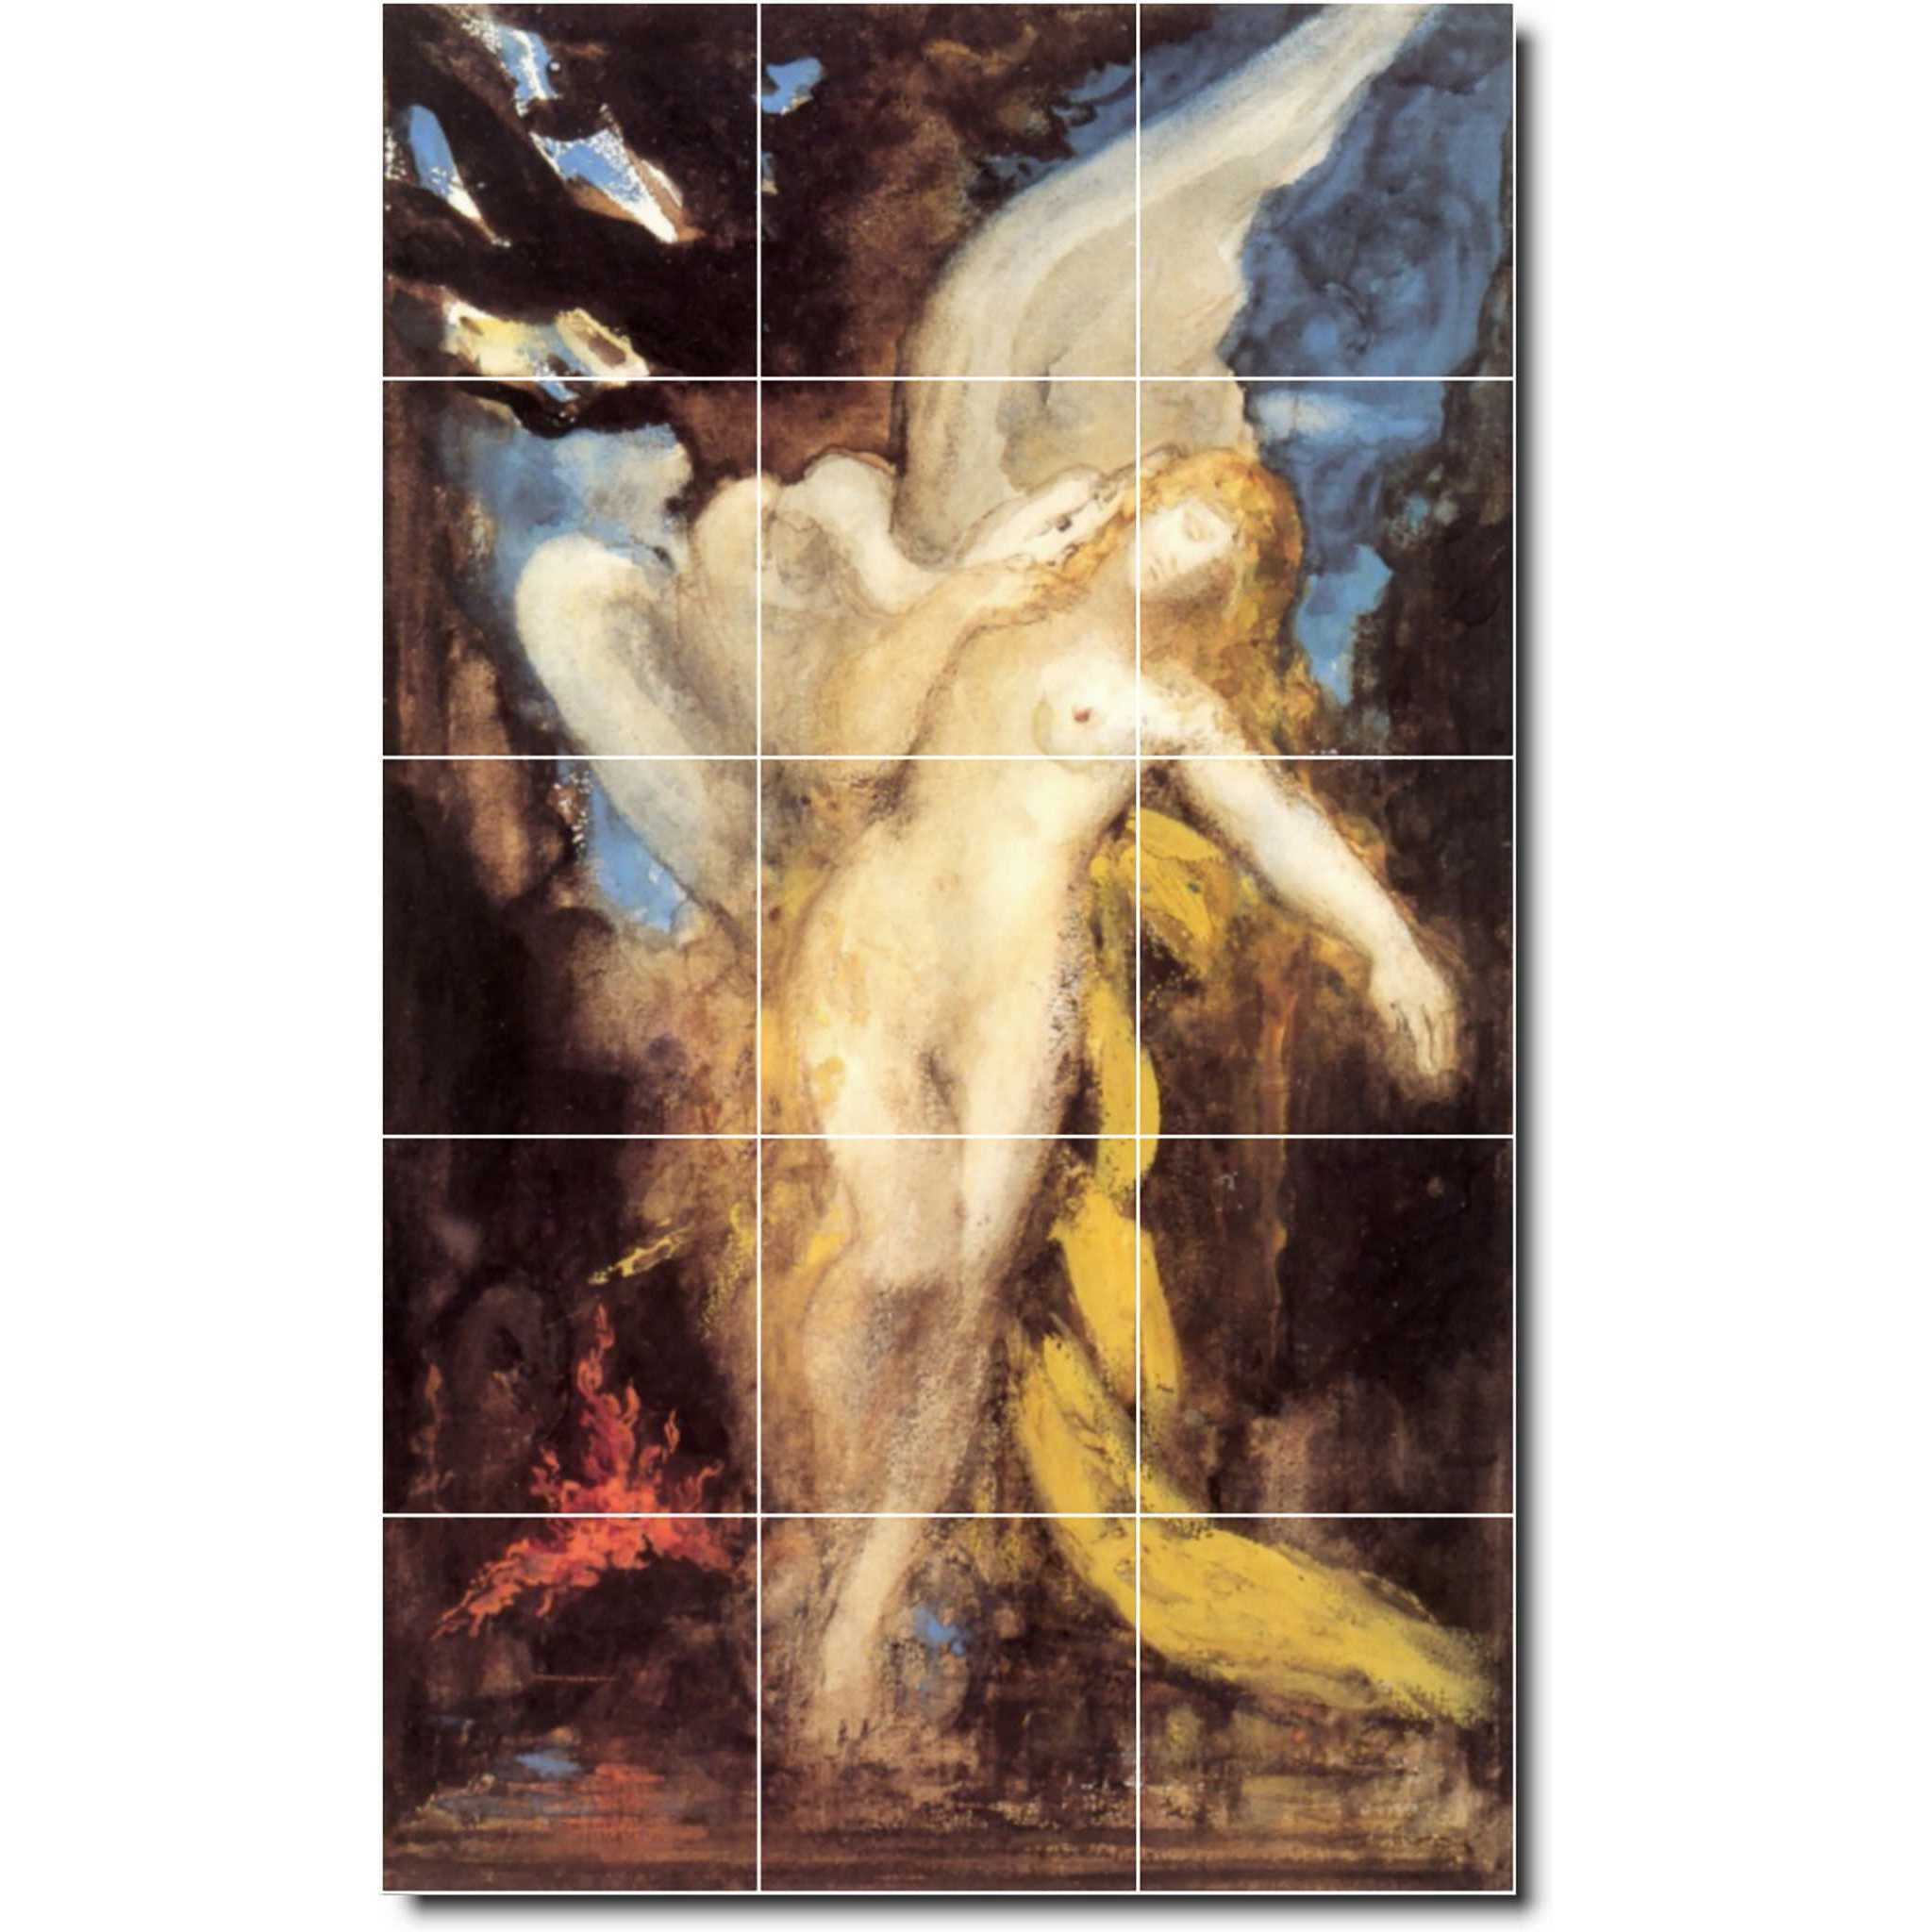 gustave moreau nude painting ceramic tile mural p06449